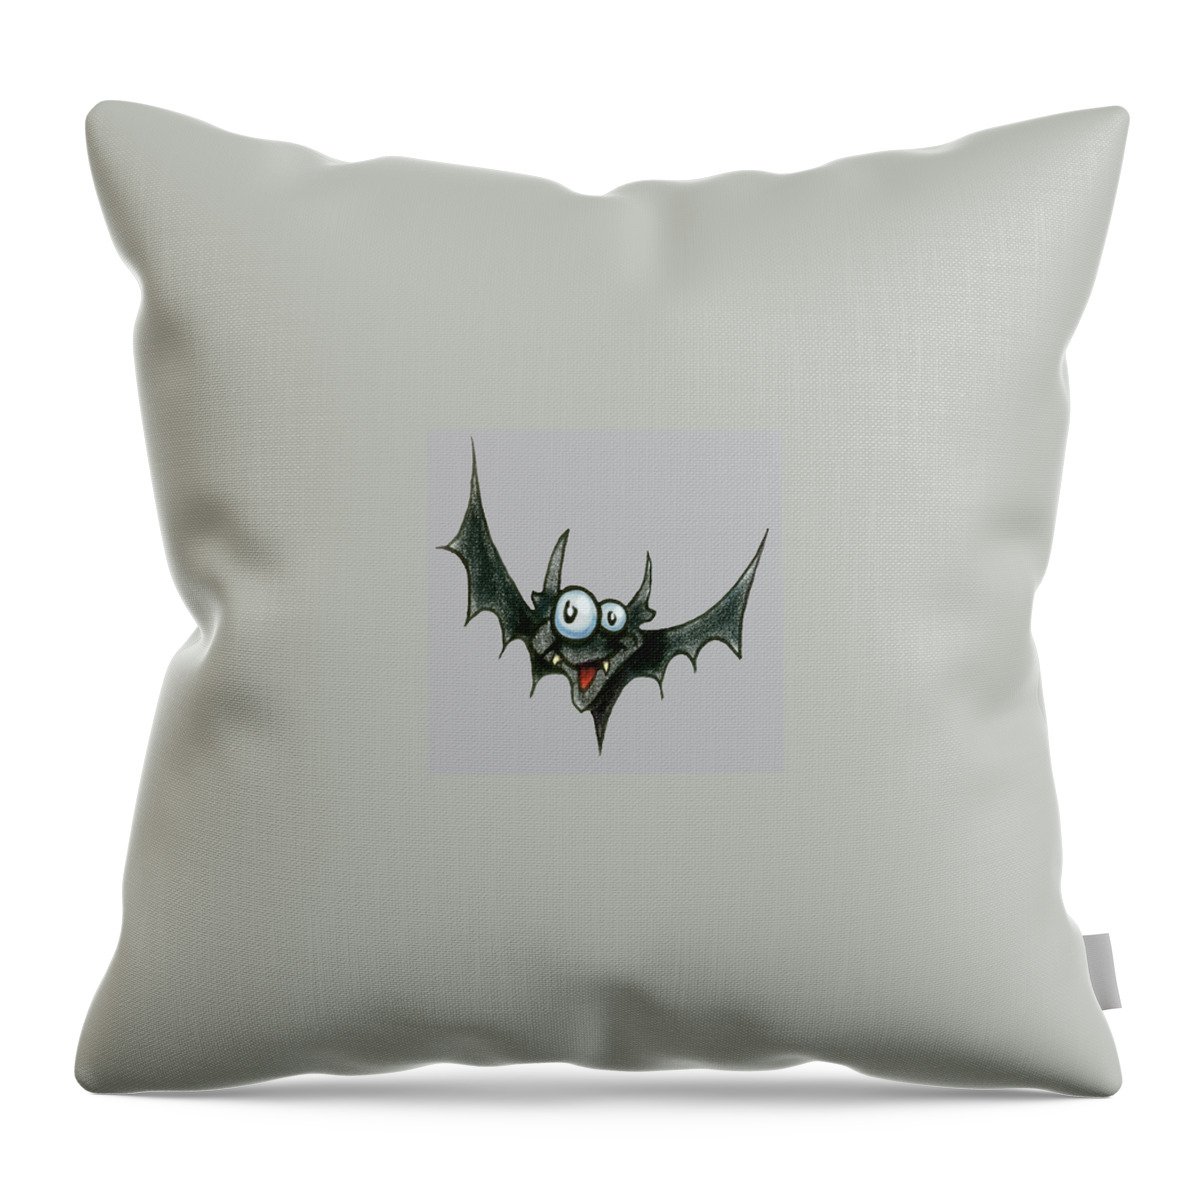 Bat Throw Pillow featuring the digital art Batty by Kevin Middleton